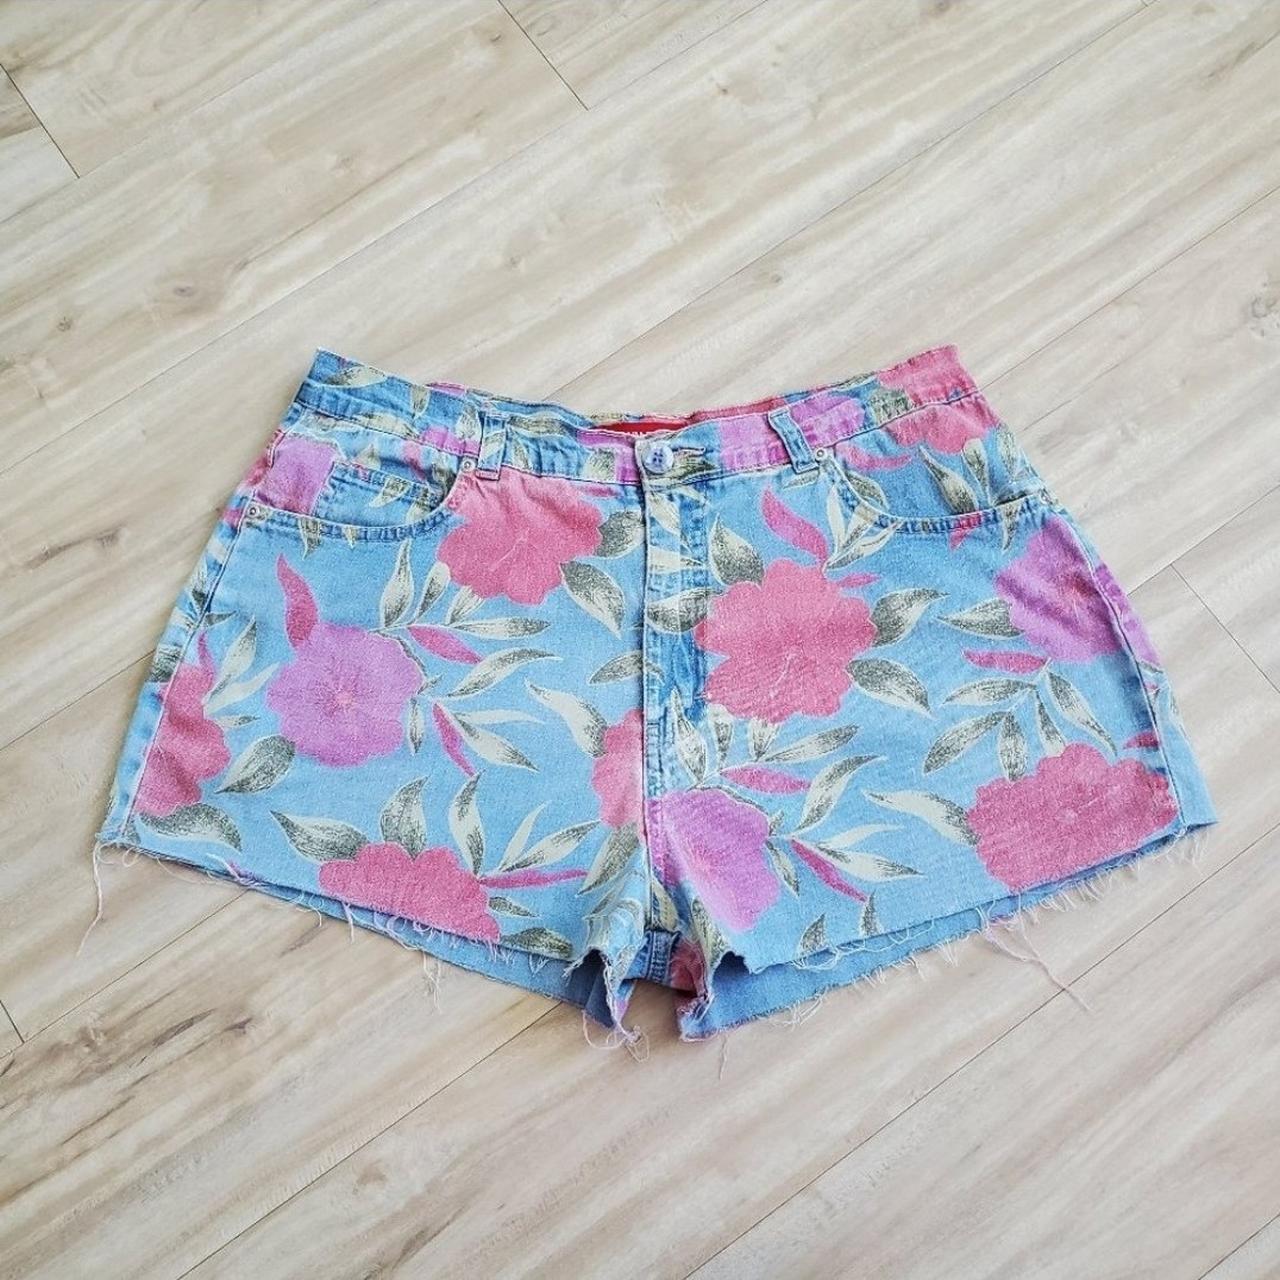 Women's Blue and Pink Shorts | Depop